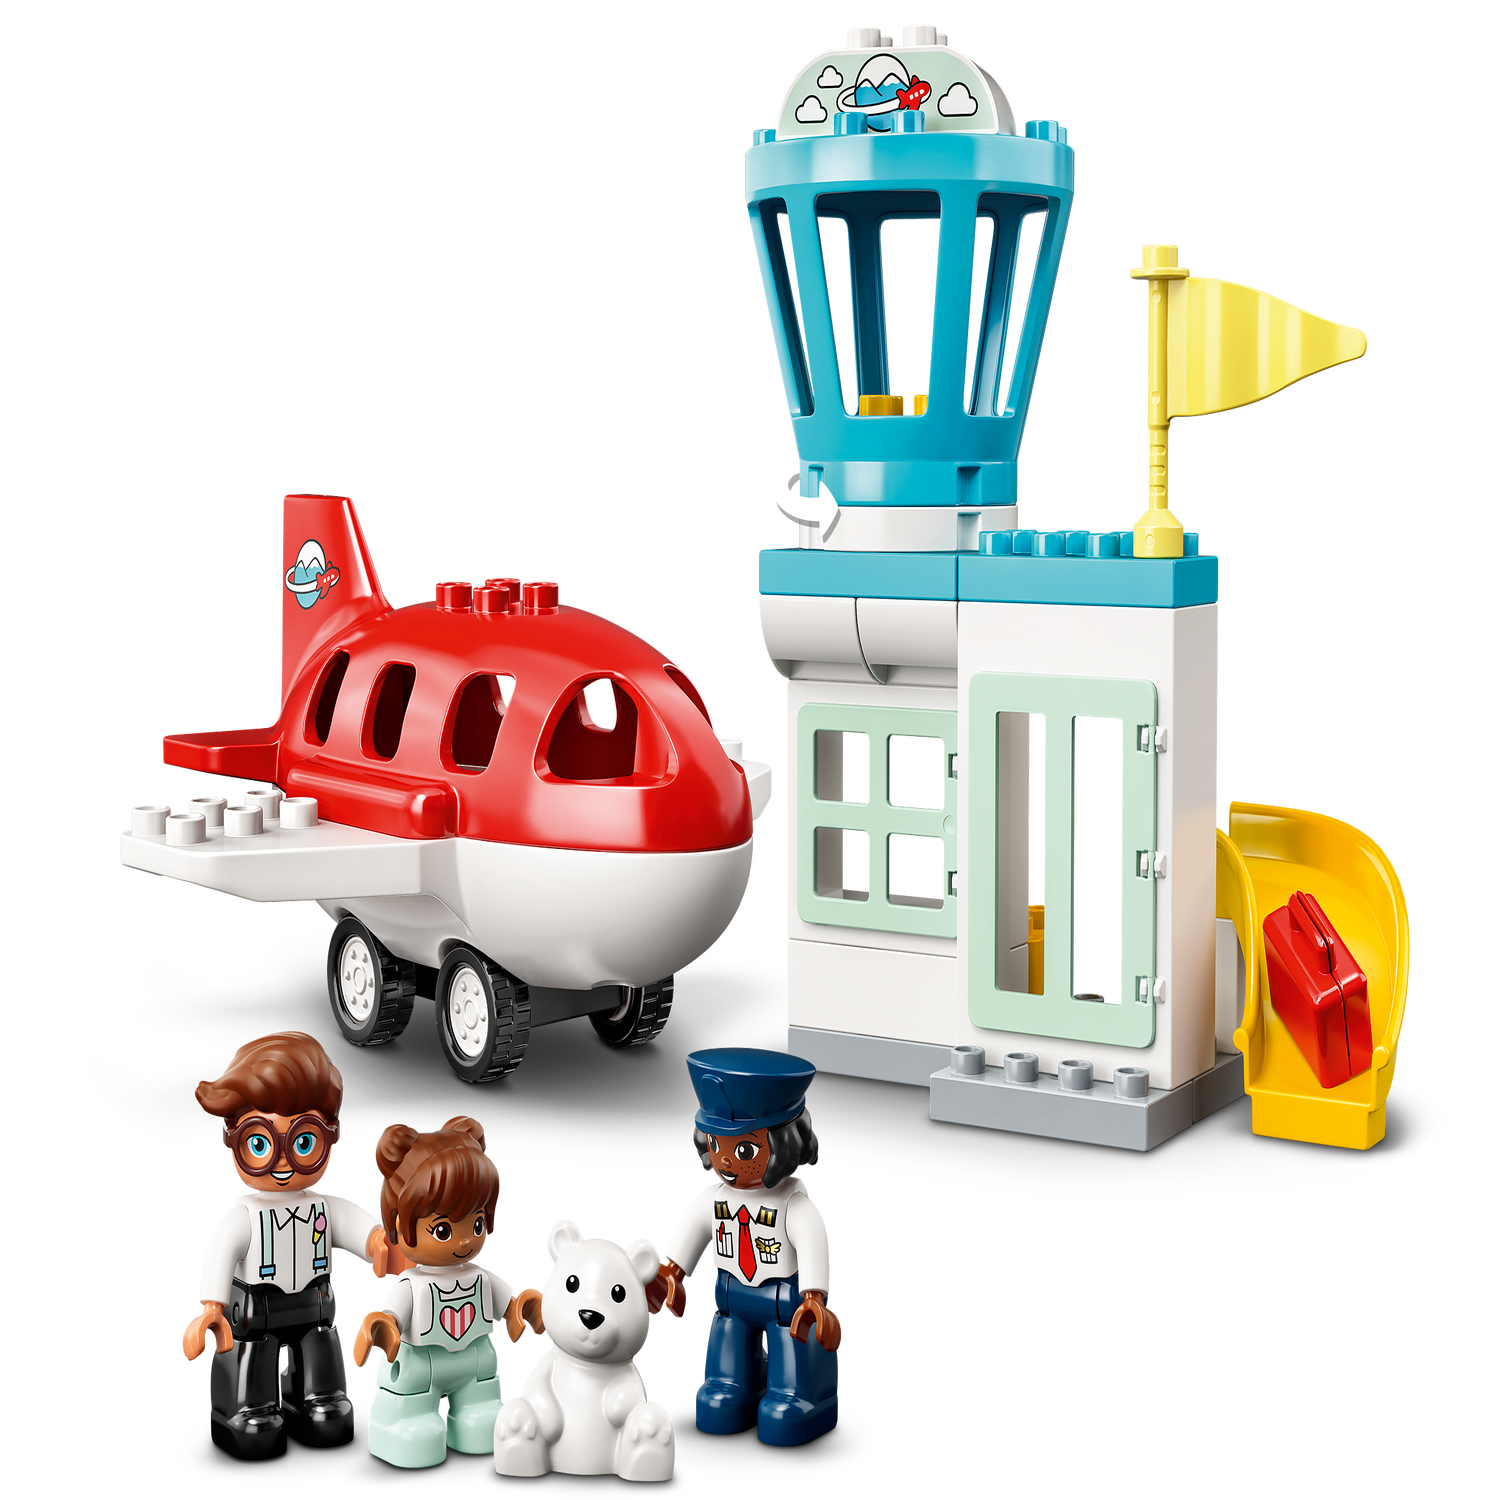 Airplane & Airport 10961 | DUPLO® Buy online at the Official LEGO® Shop US